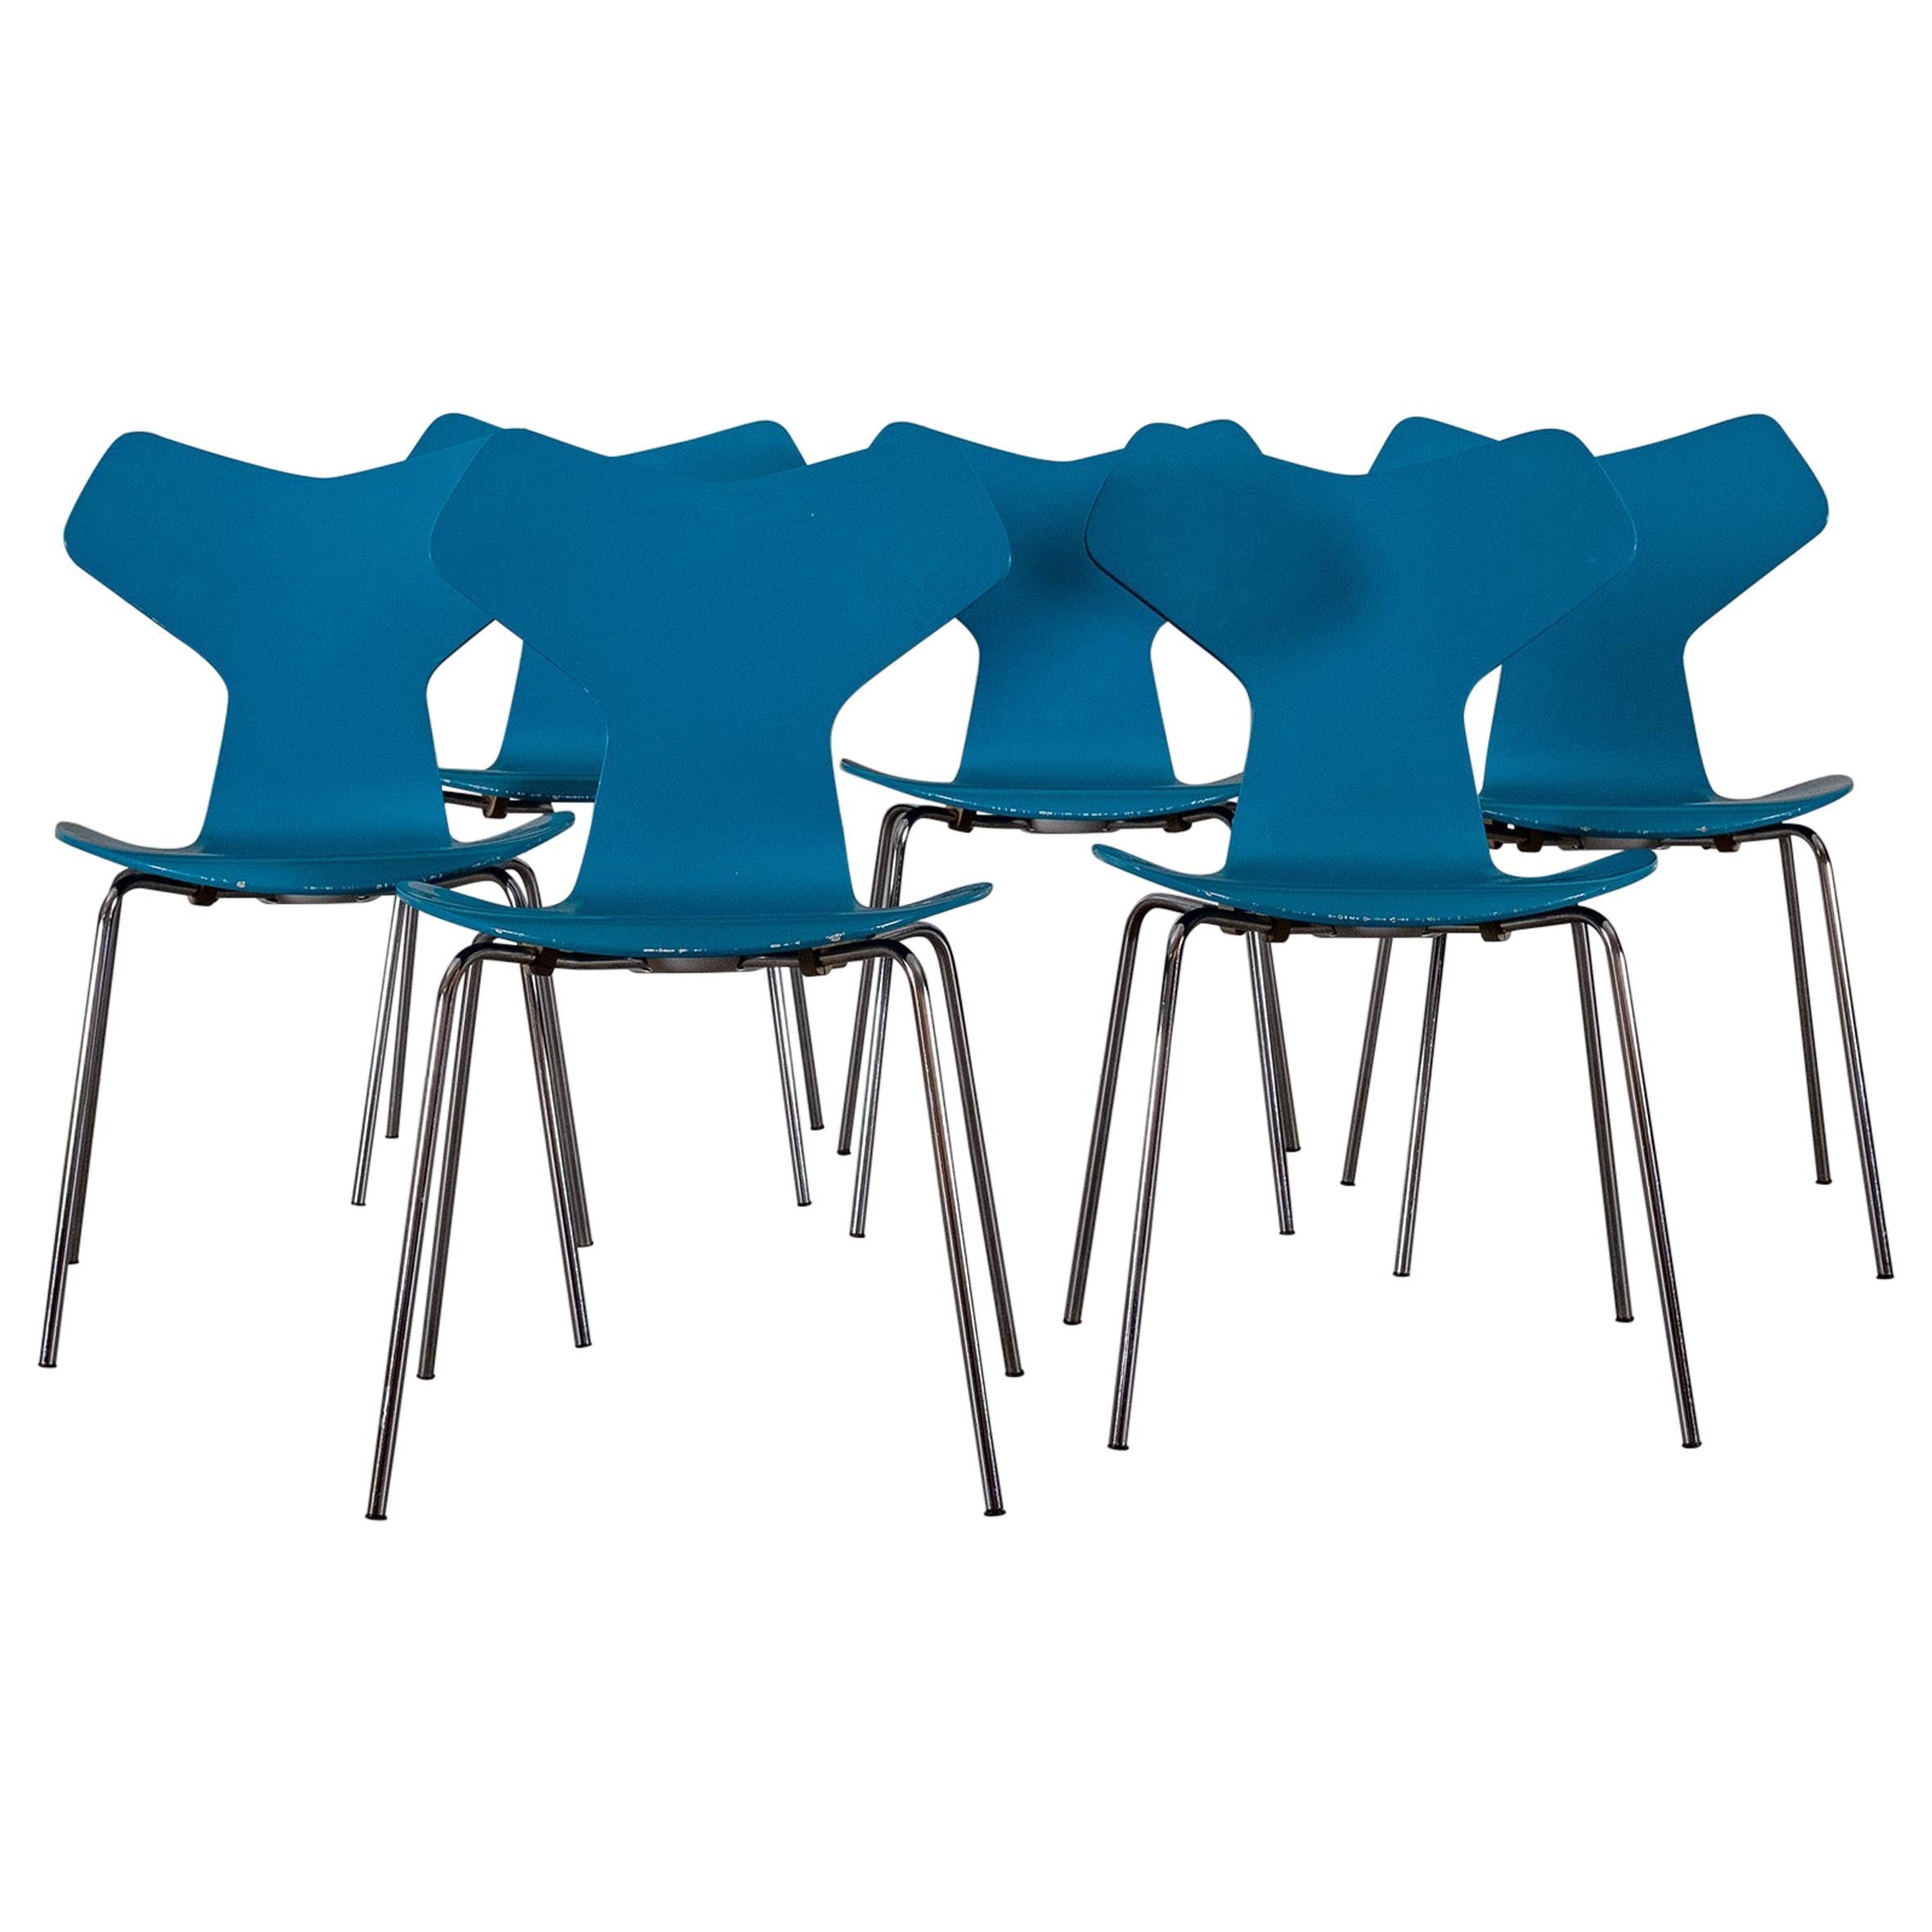 Set of 6 Dining Chairs Model Grand Prix 3130 by Arne Jacobsen